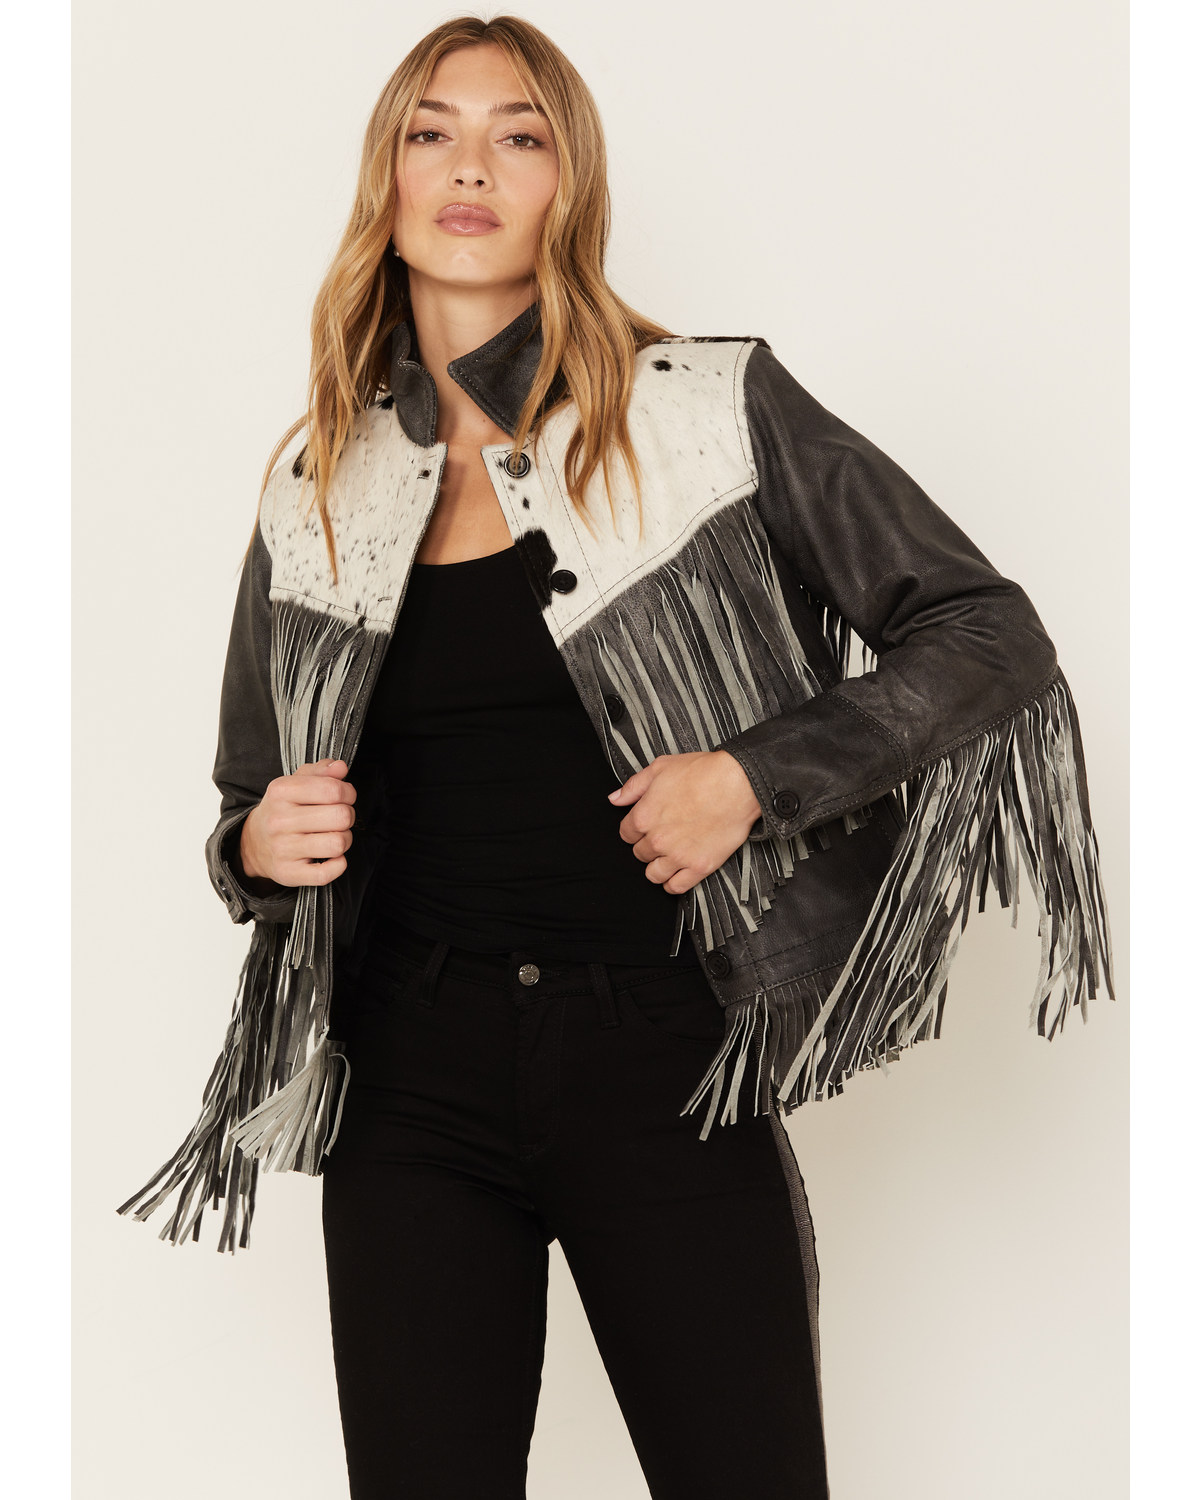 STS Ranchwear Women's Frontier Blackstone Cowhide and Fringe Leather Jacket